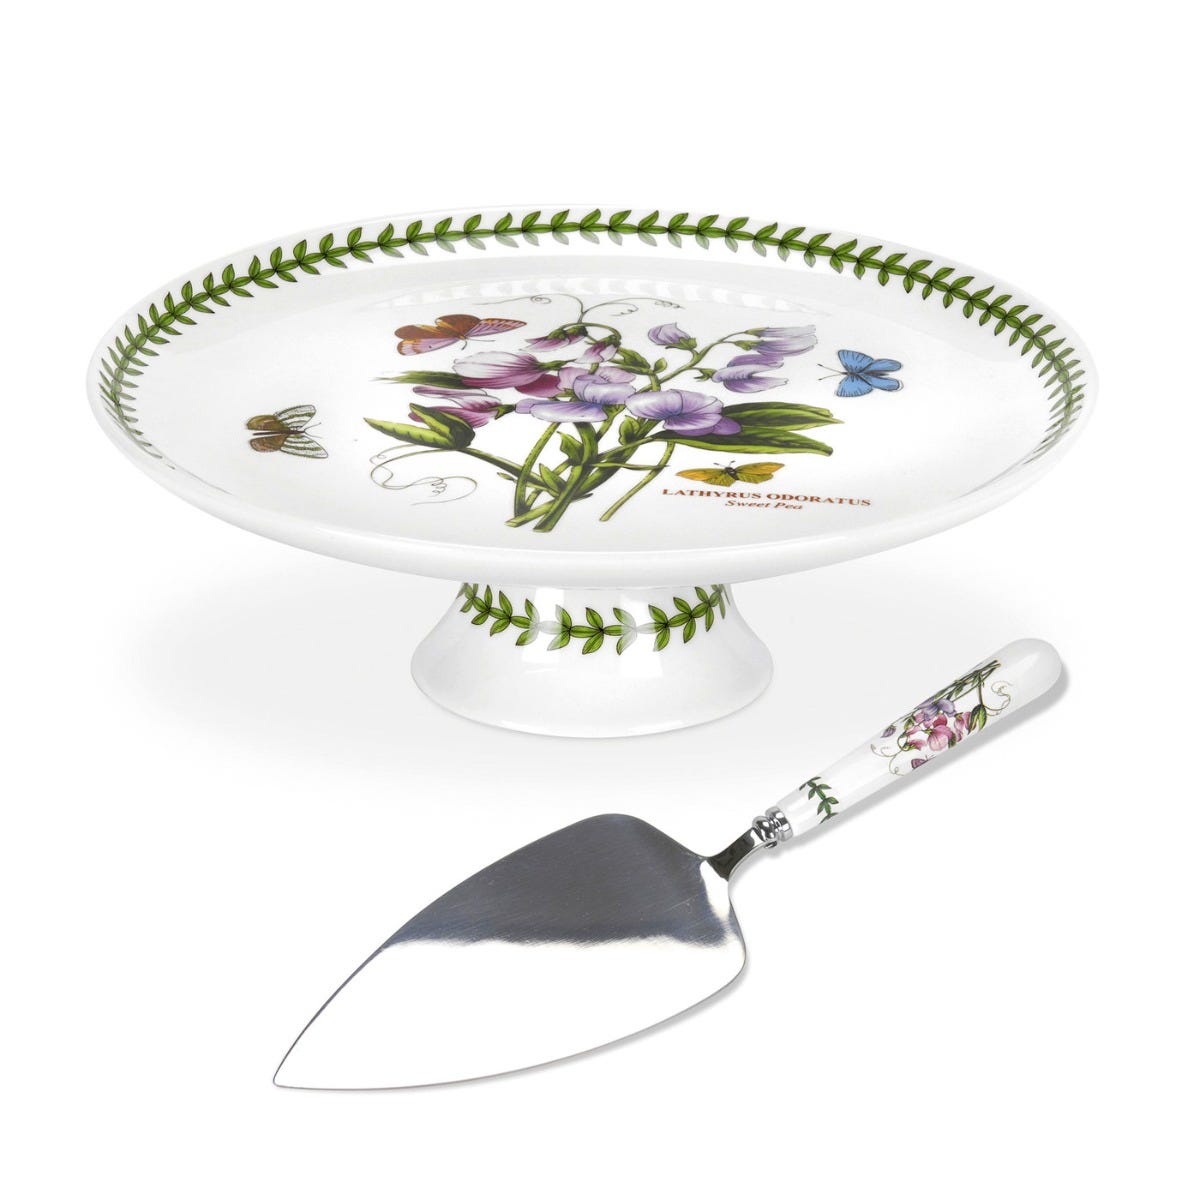 Botanic Garden Footed Cake Plate with Server